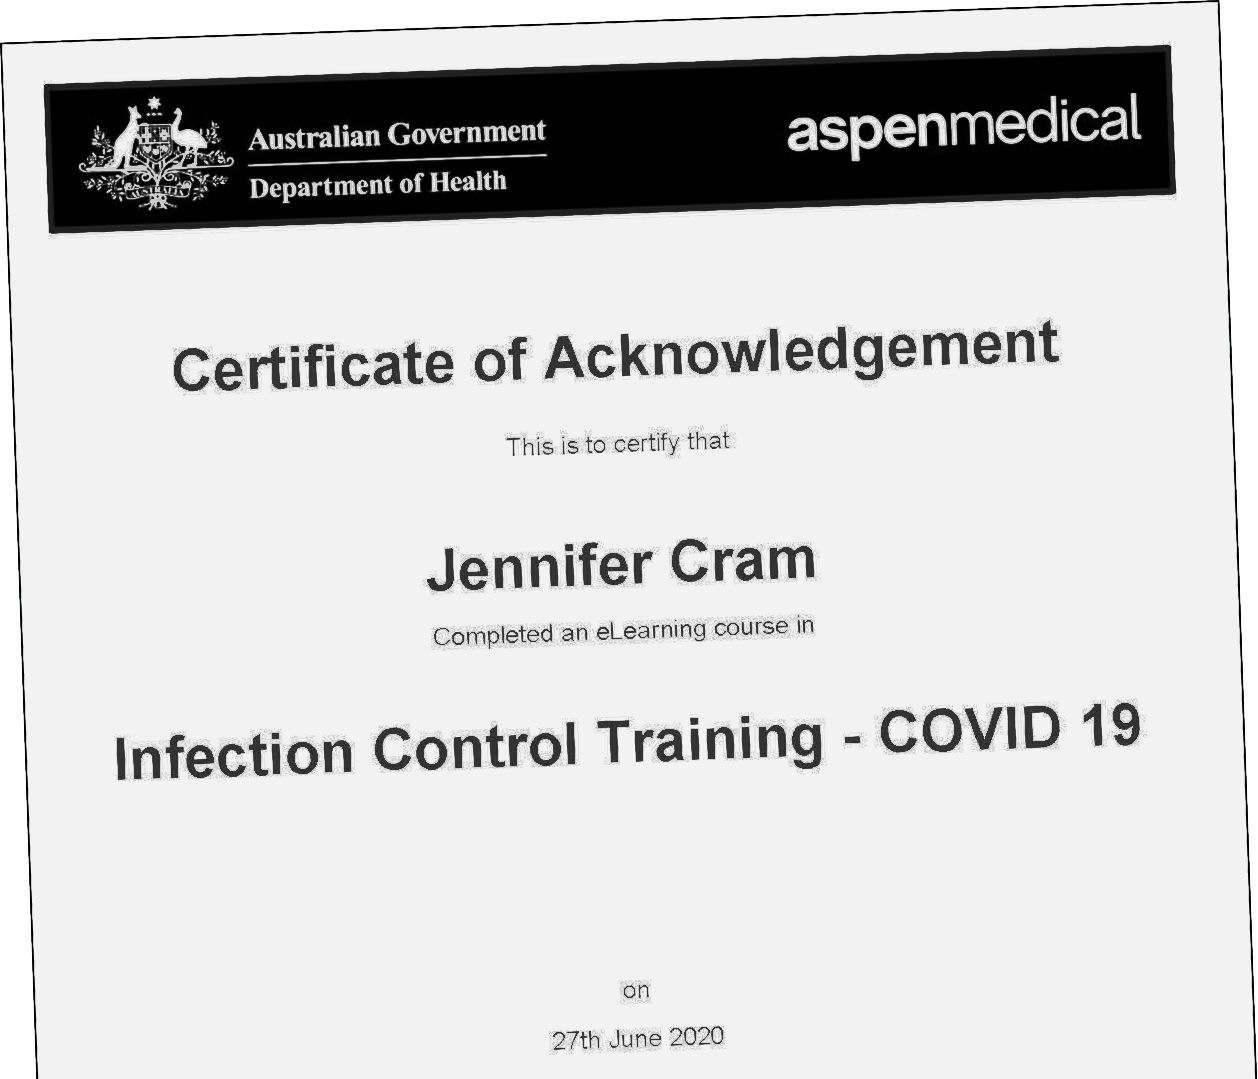 Certificate of Acknowledgement - Infection
                  Control Training - COVID 19